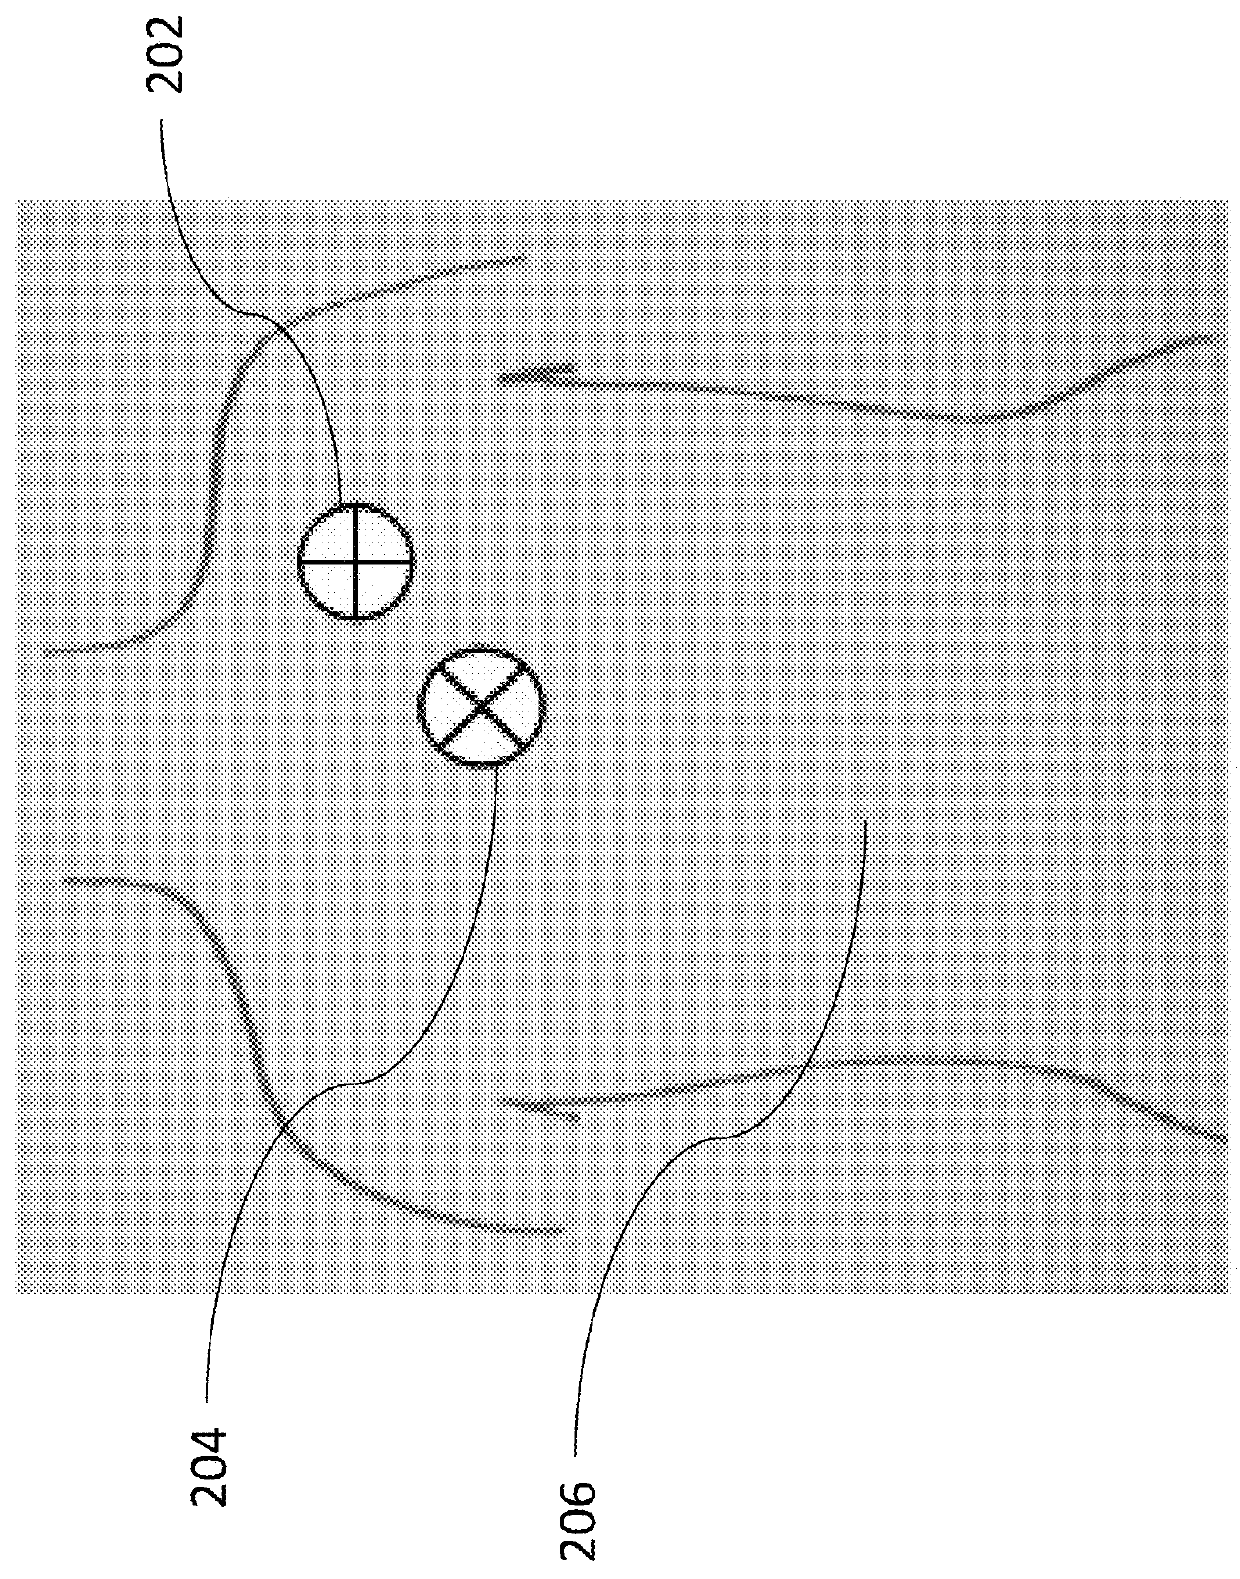 ECG patch and methods of use